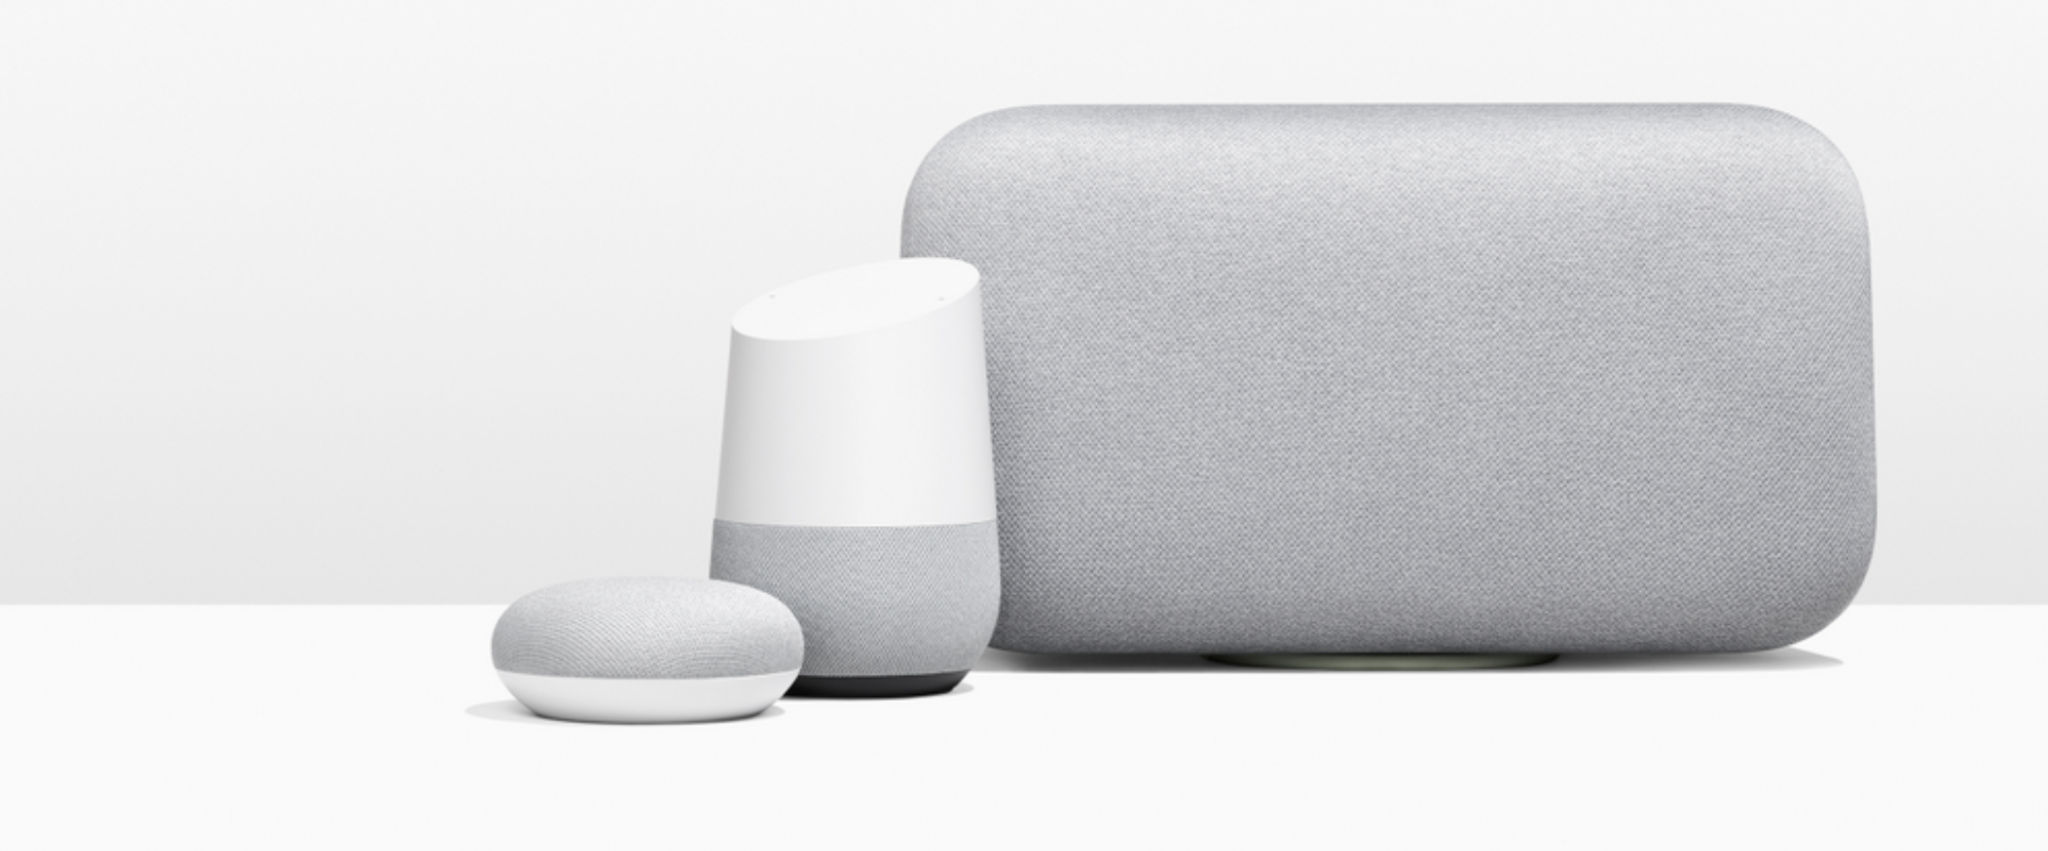 A Google Home App Update Makes it Easy to Link Streaming Services